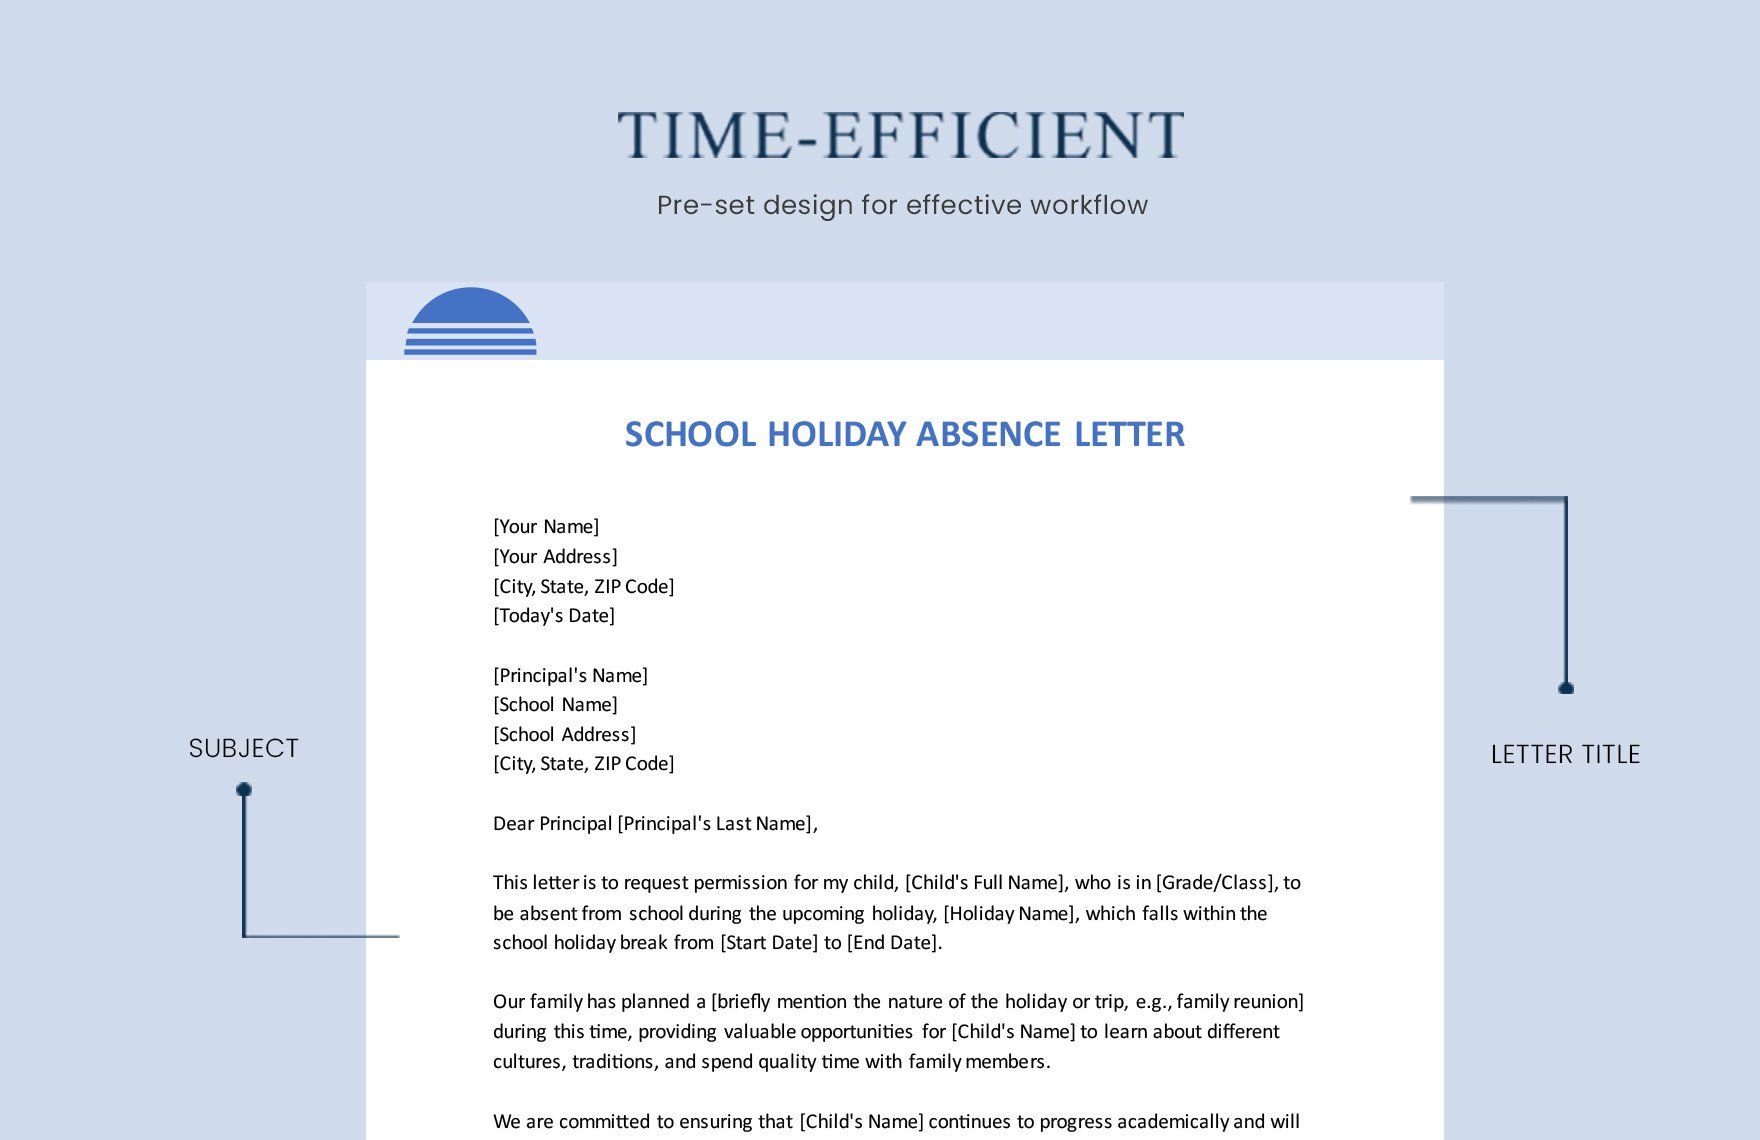 School Holiday Absence Letter